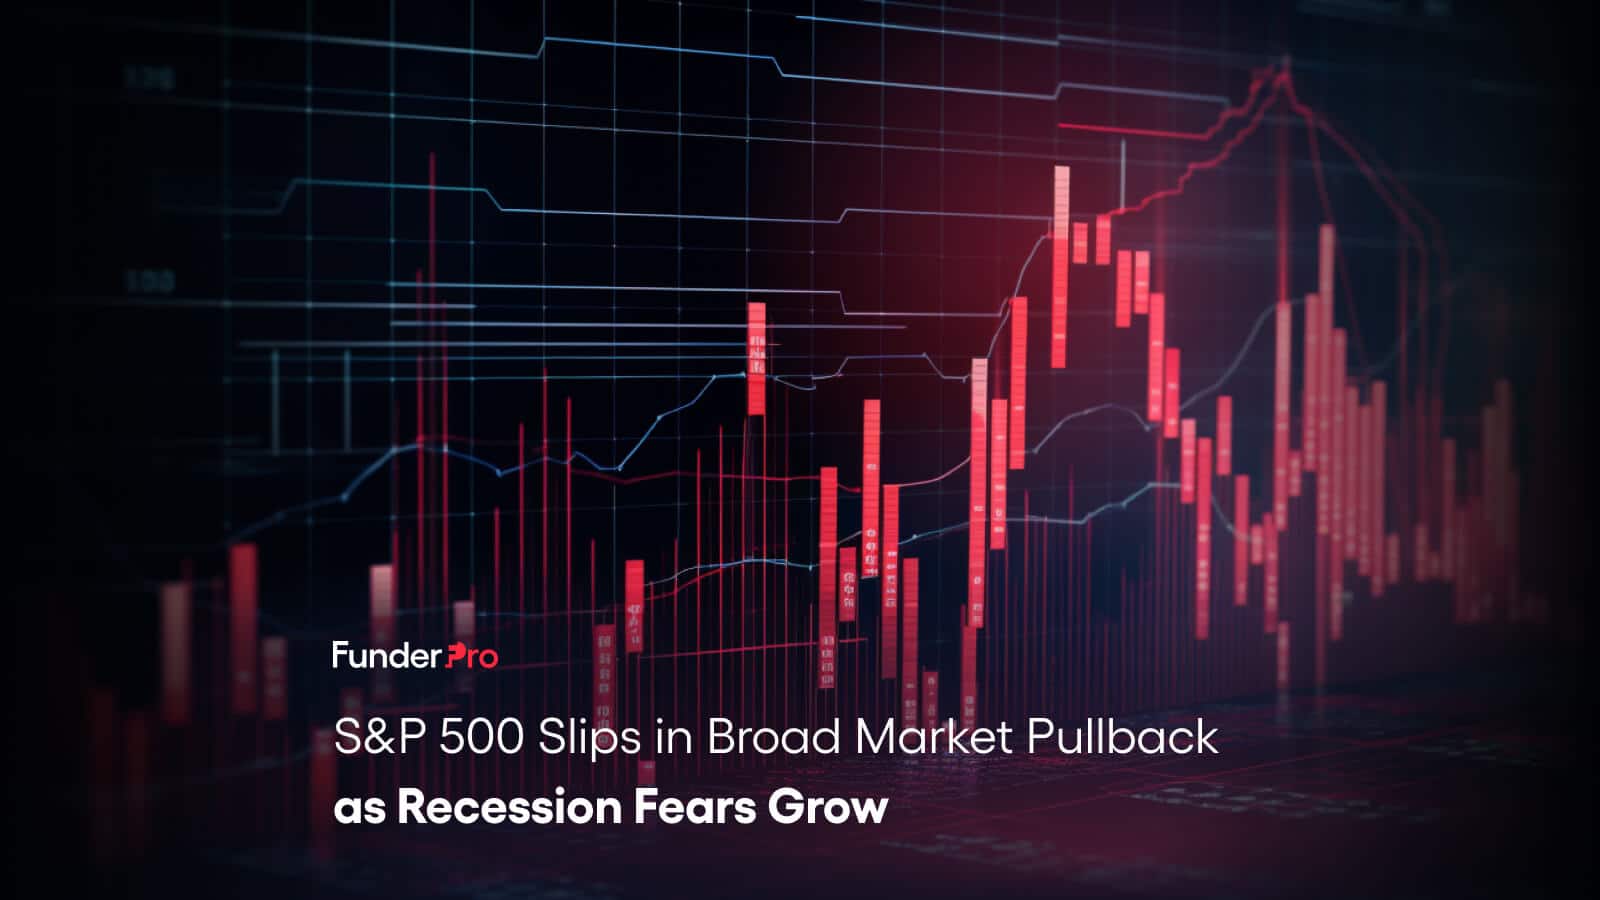 S&P 500 Slips in Broad Market Pullback as Recession Fears Grow